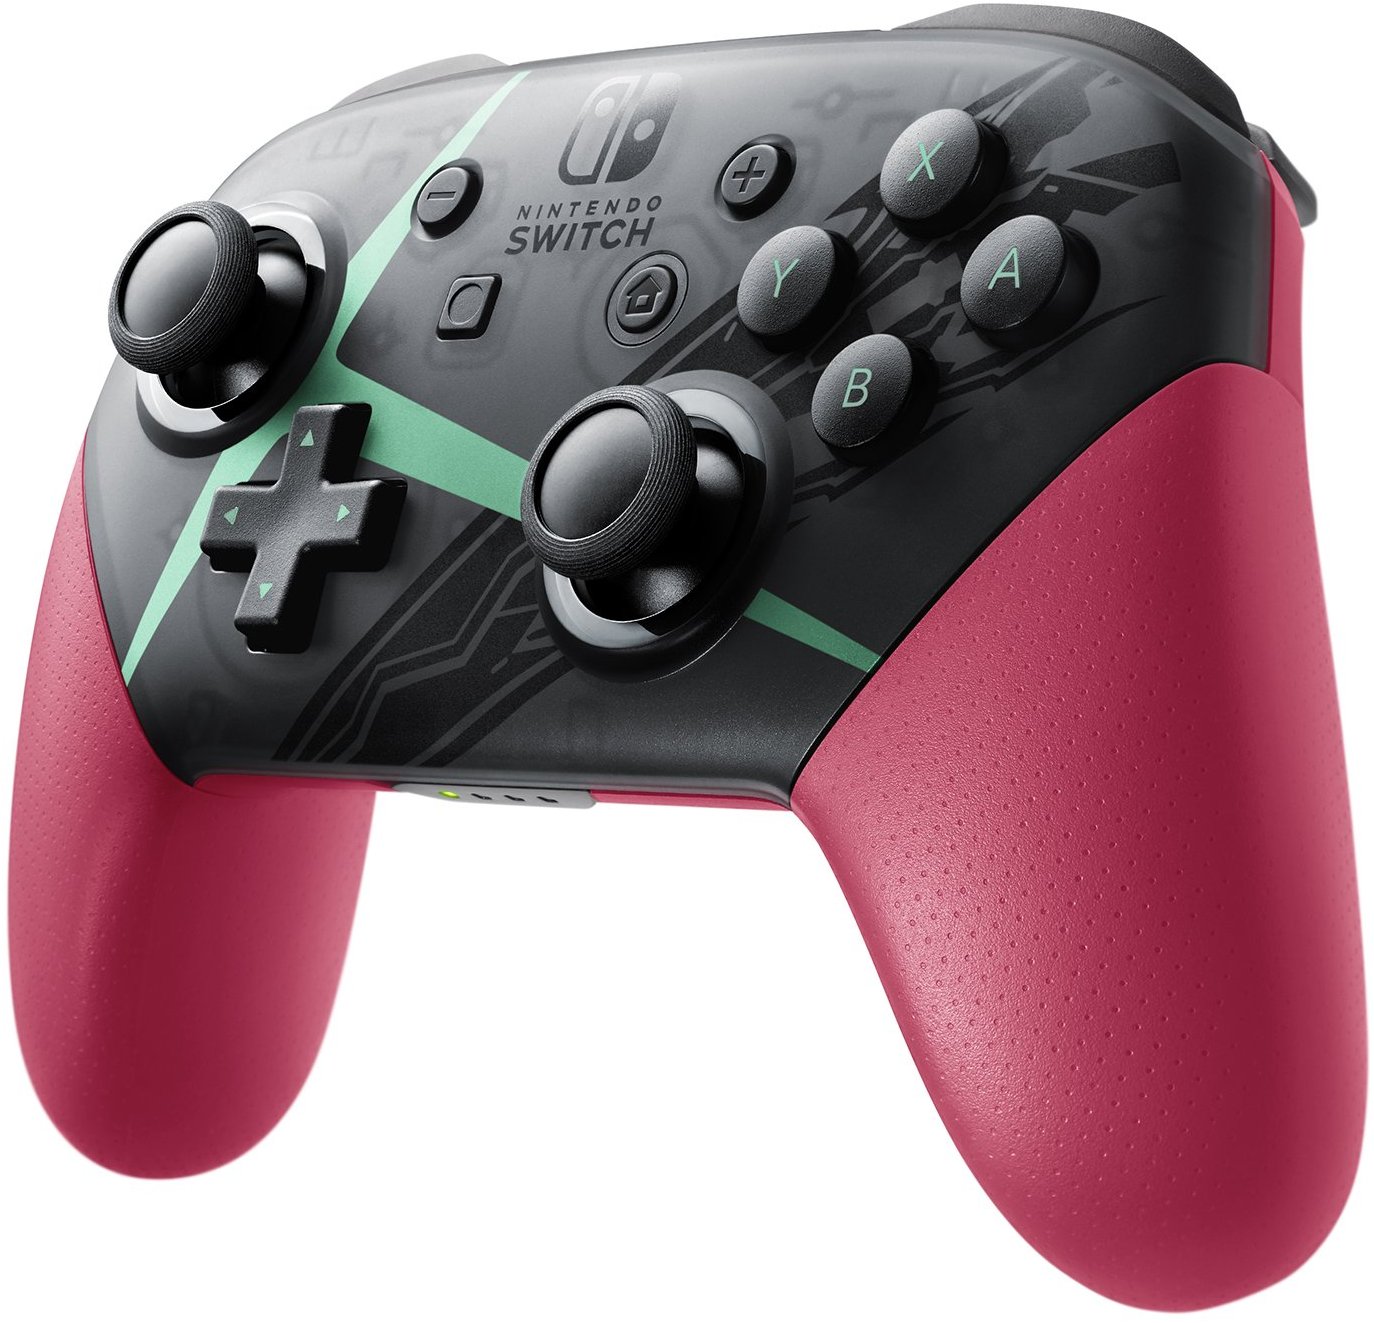 switch pro controller versions